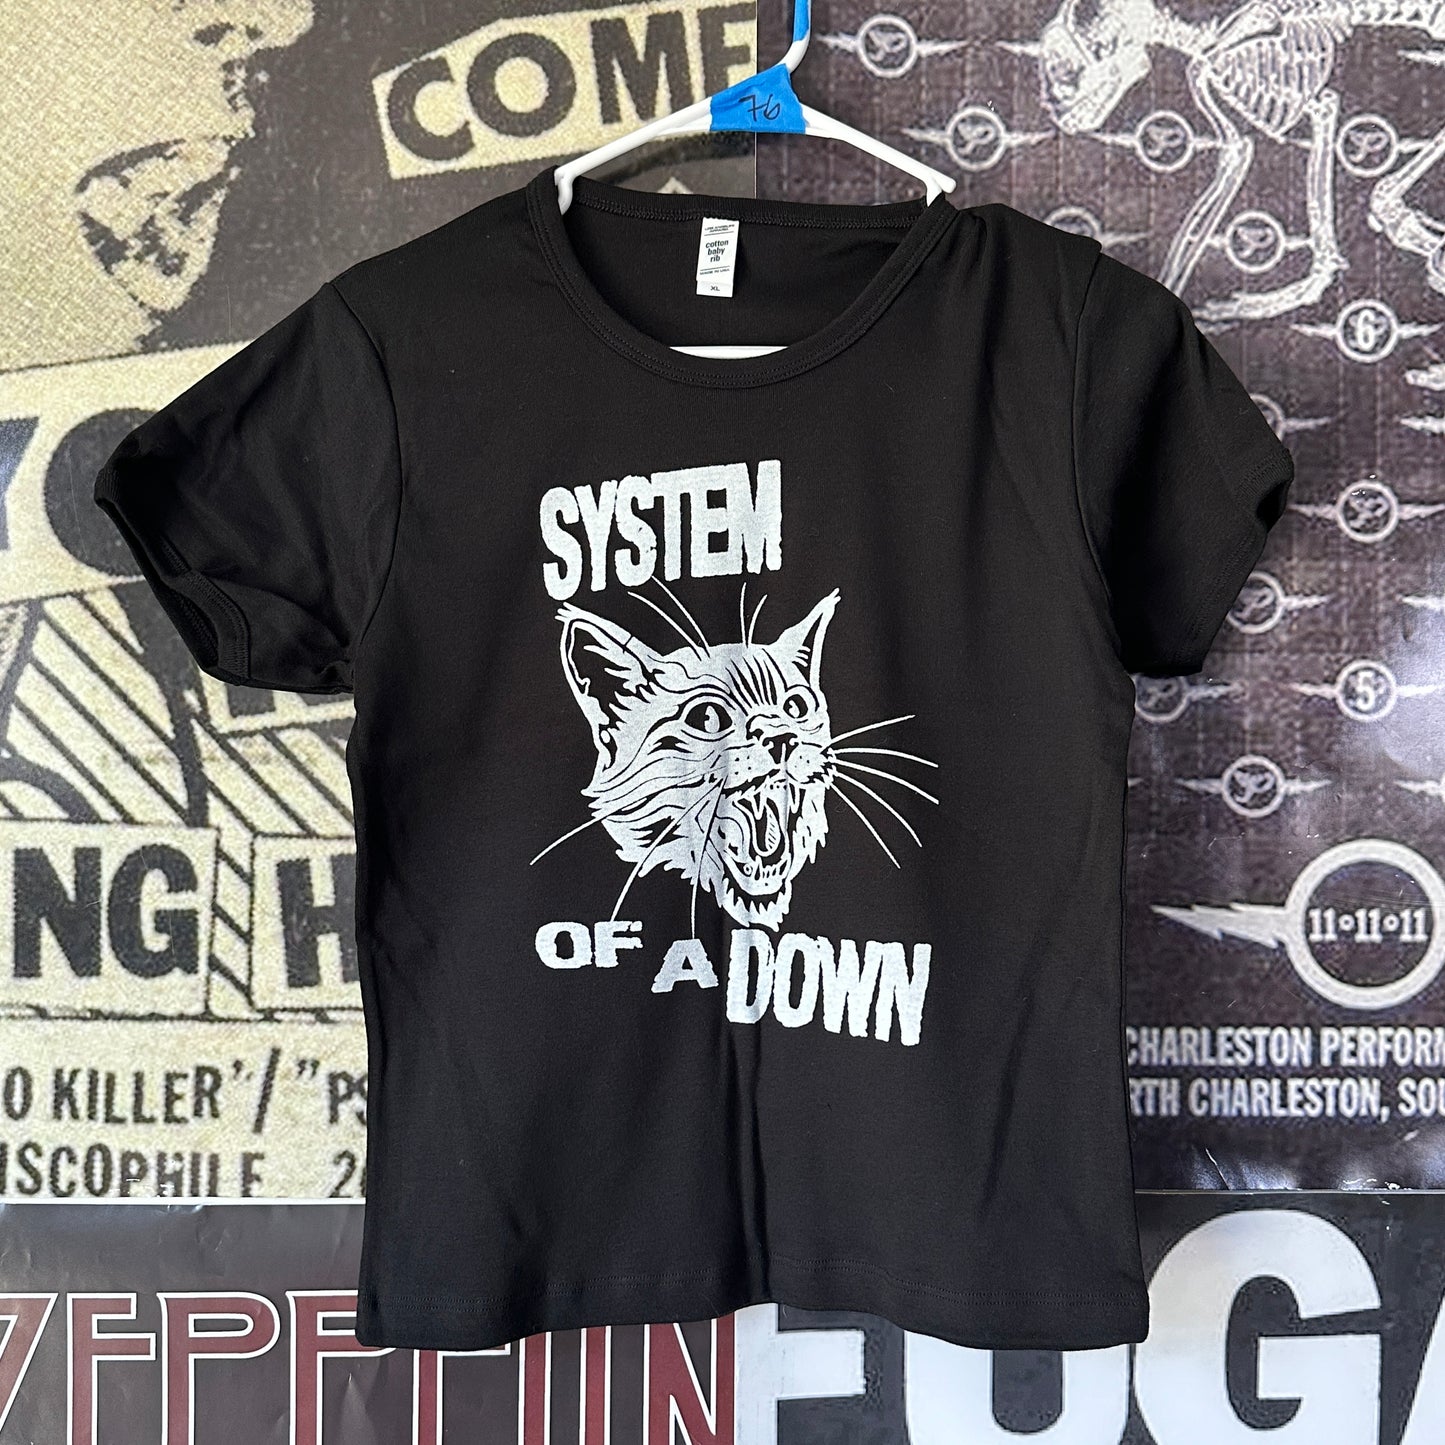 System of a Down black long baby tee